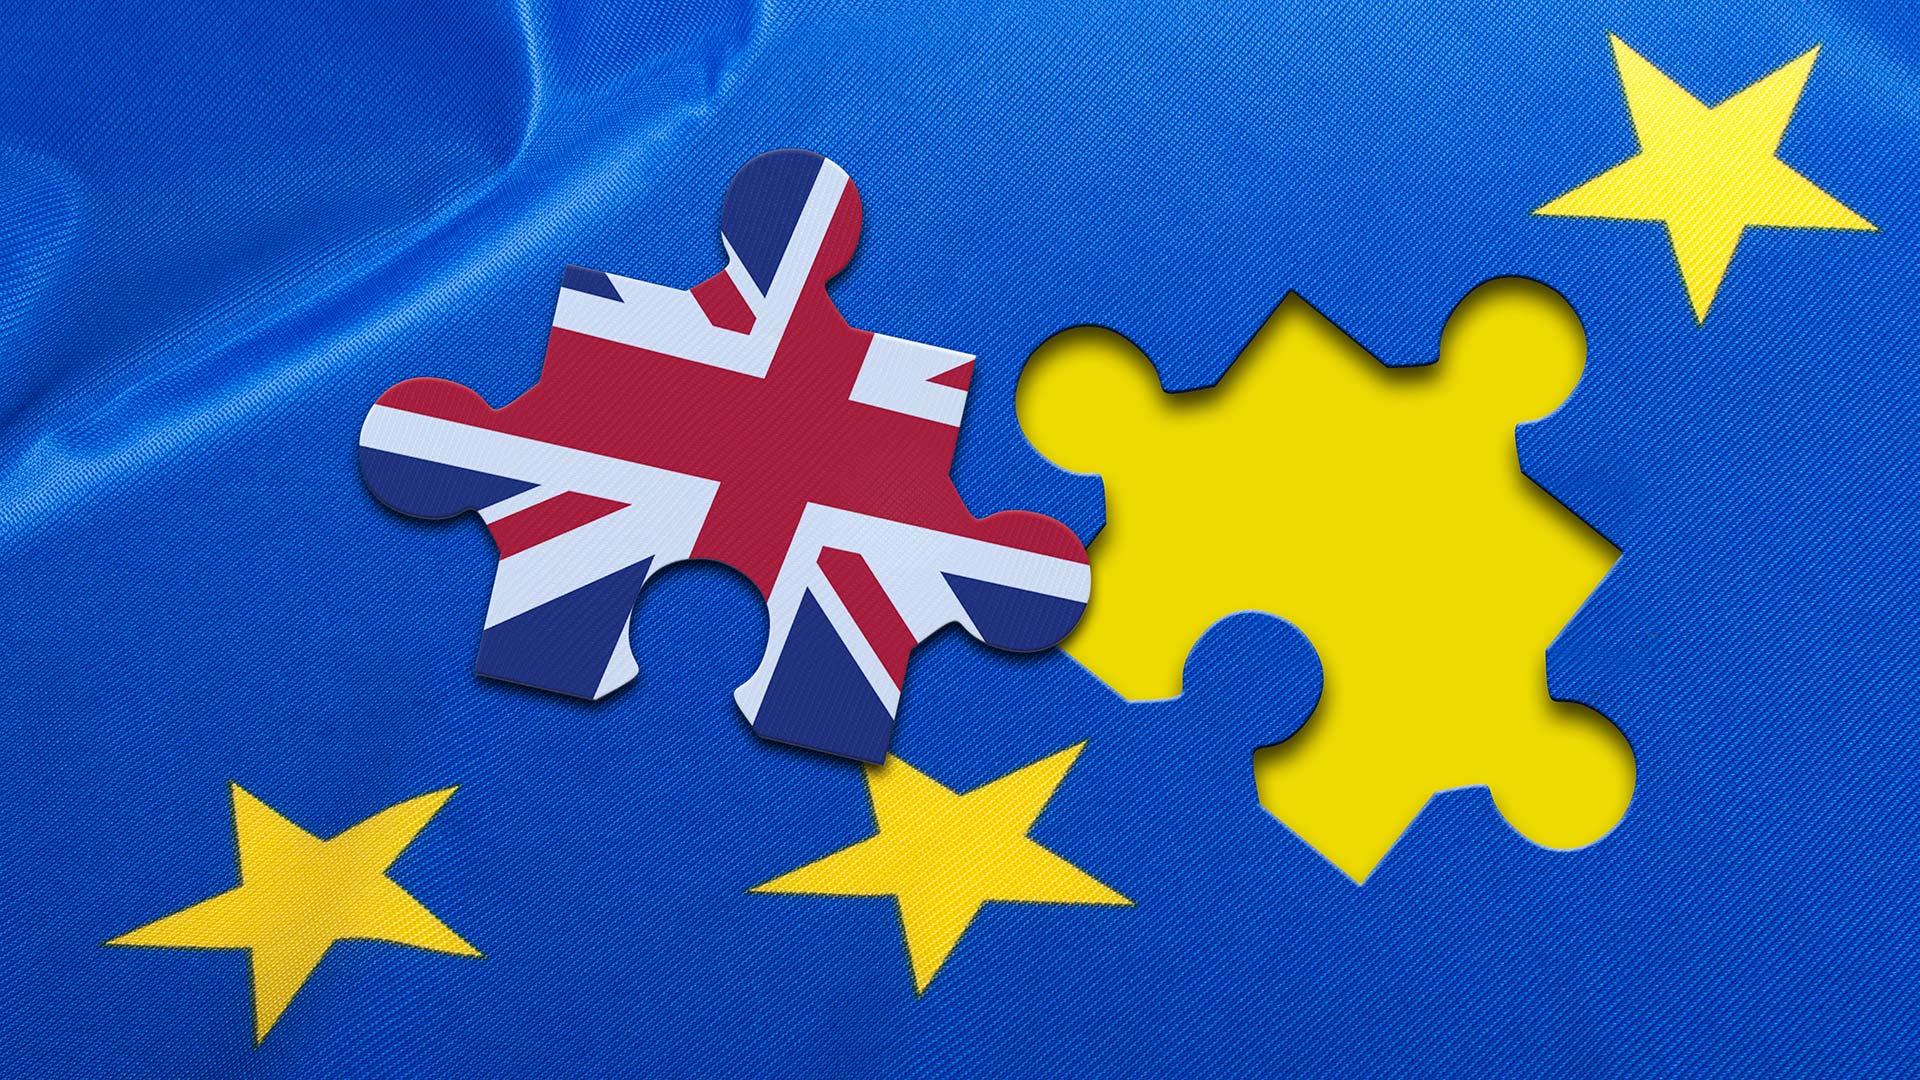 UK safety regulation after Brexit: What you need to know